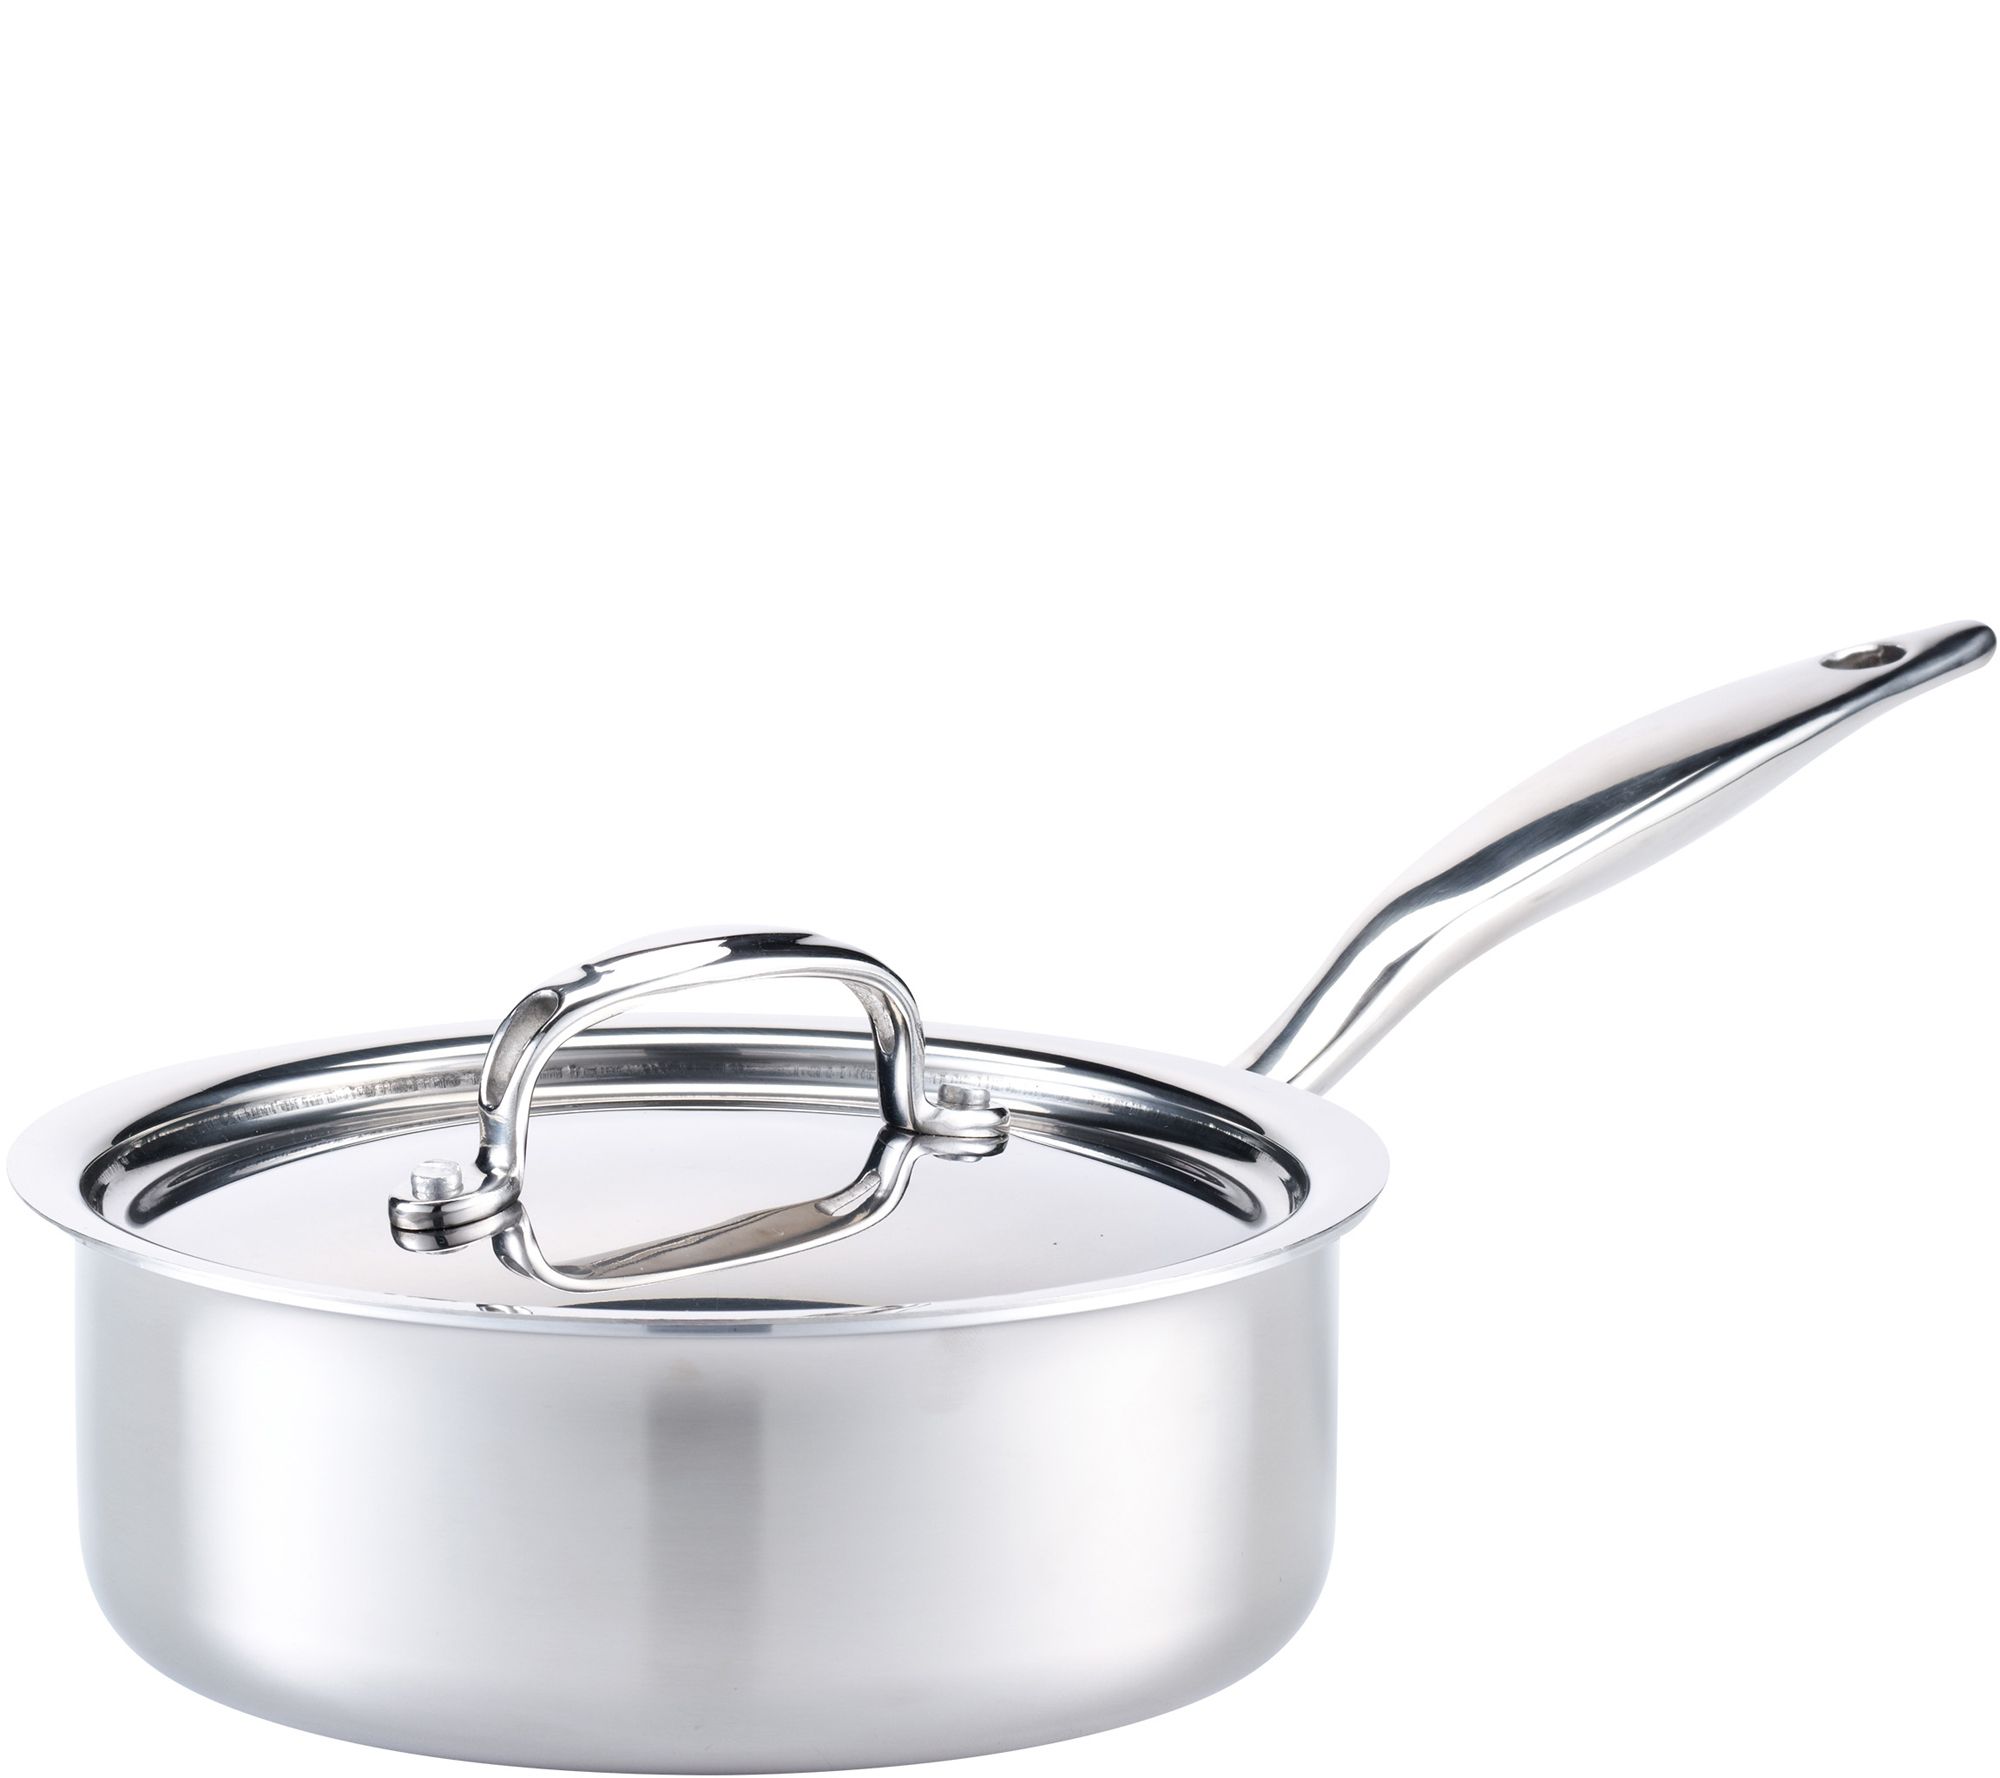 BergHOFF Belly Shape 18/10 Stainless Steel 1.5-qt. Sauce Pan